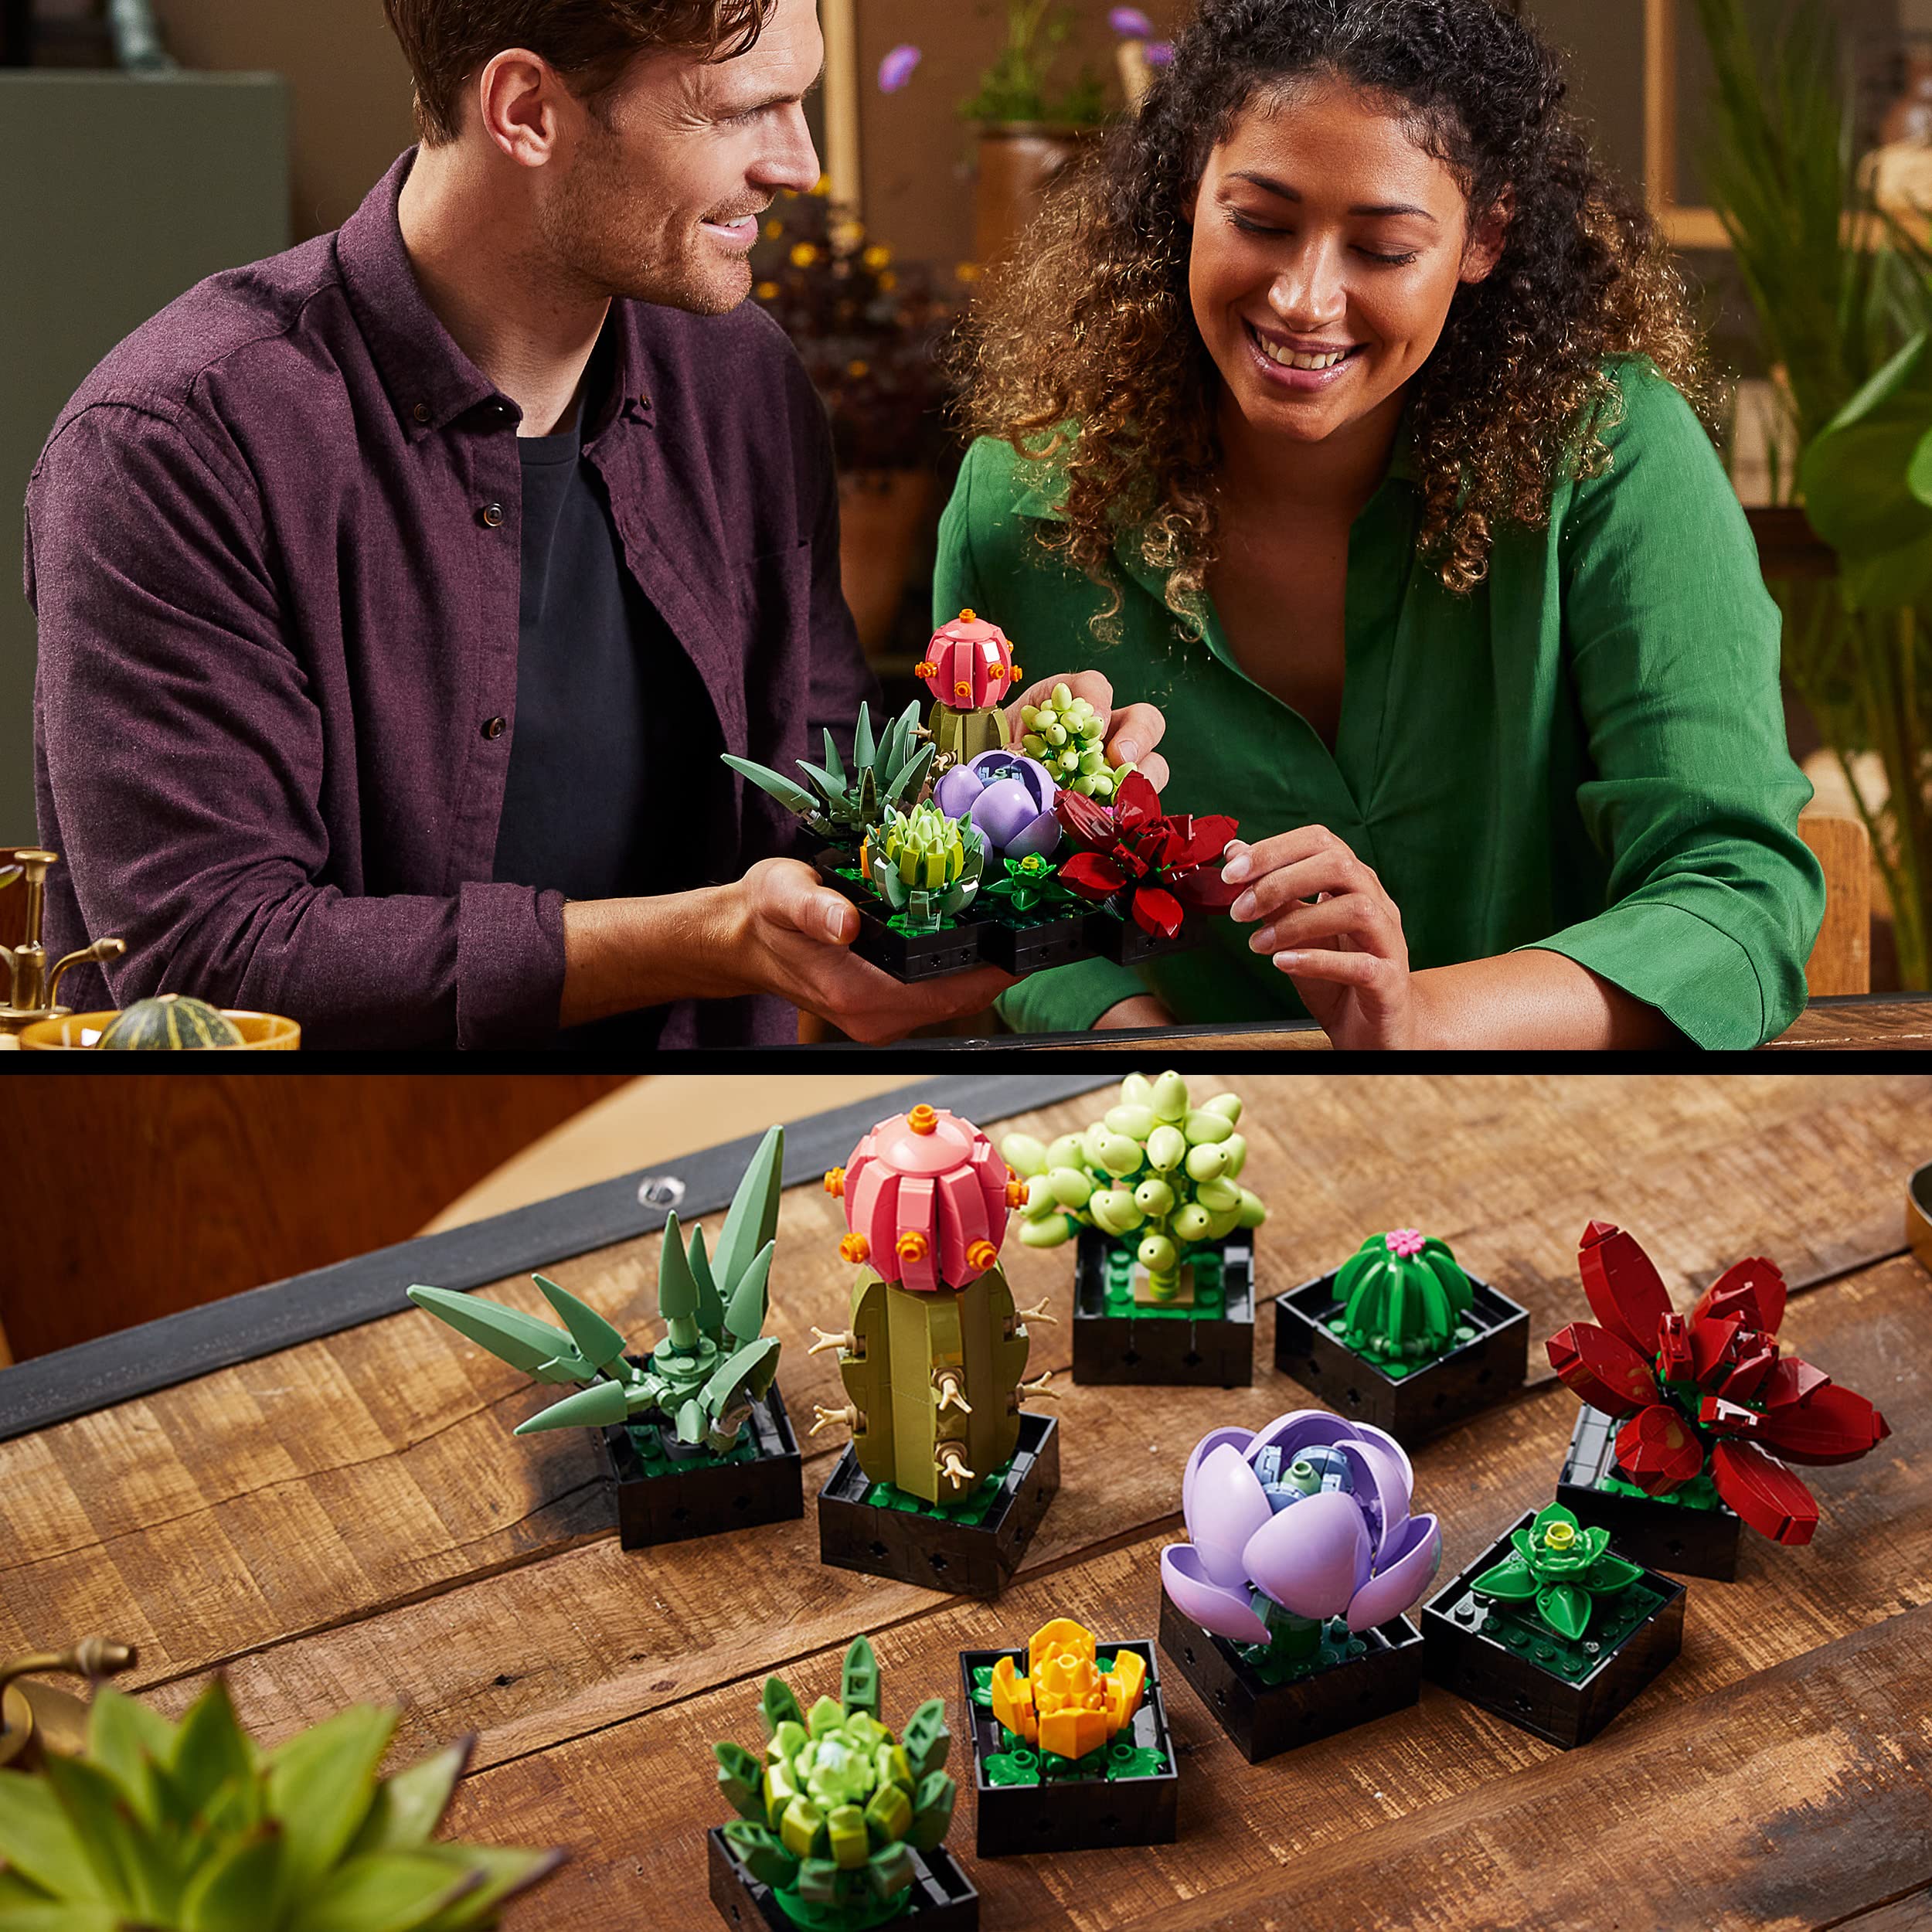 LEGO 10309 Icons Succulents Artificial Plants Set for Adults, Home Décor, Creative Hobby, Gift Idea for Her & Him, Botanical Collection (Build 9 Small Plants), Flower Bouquet Kit